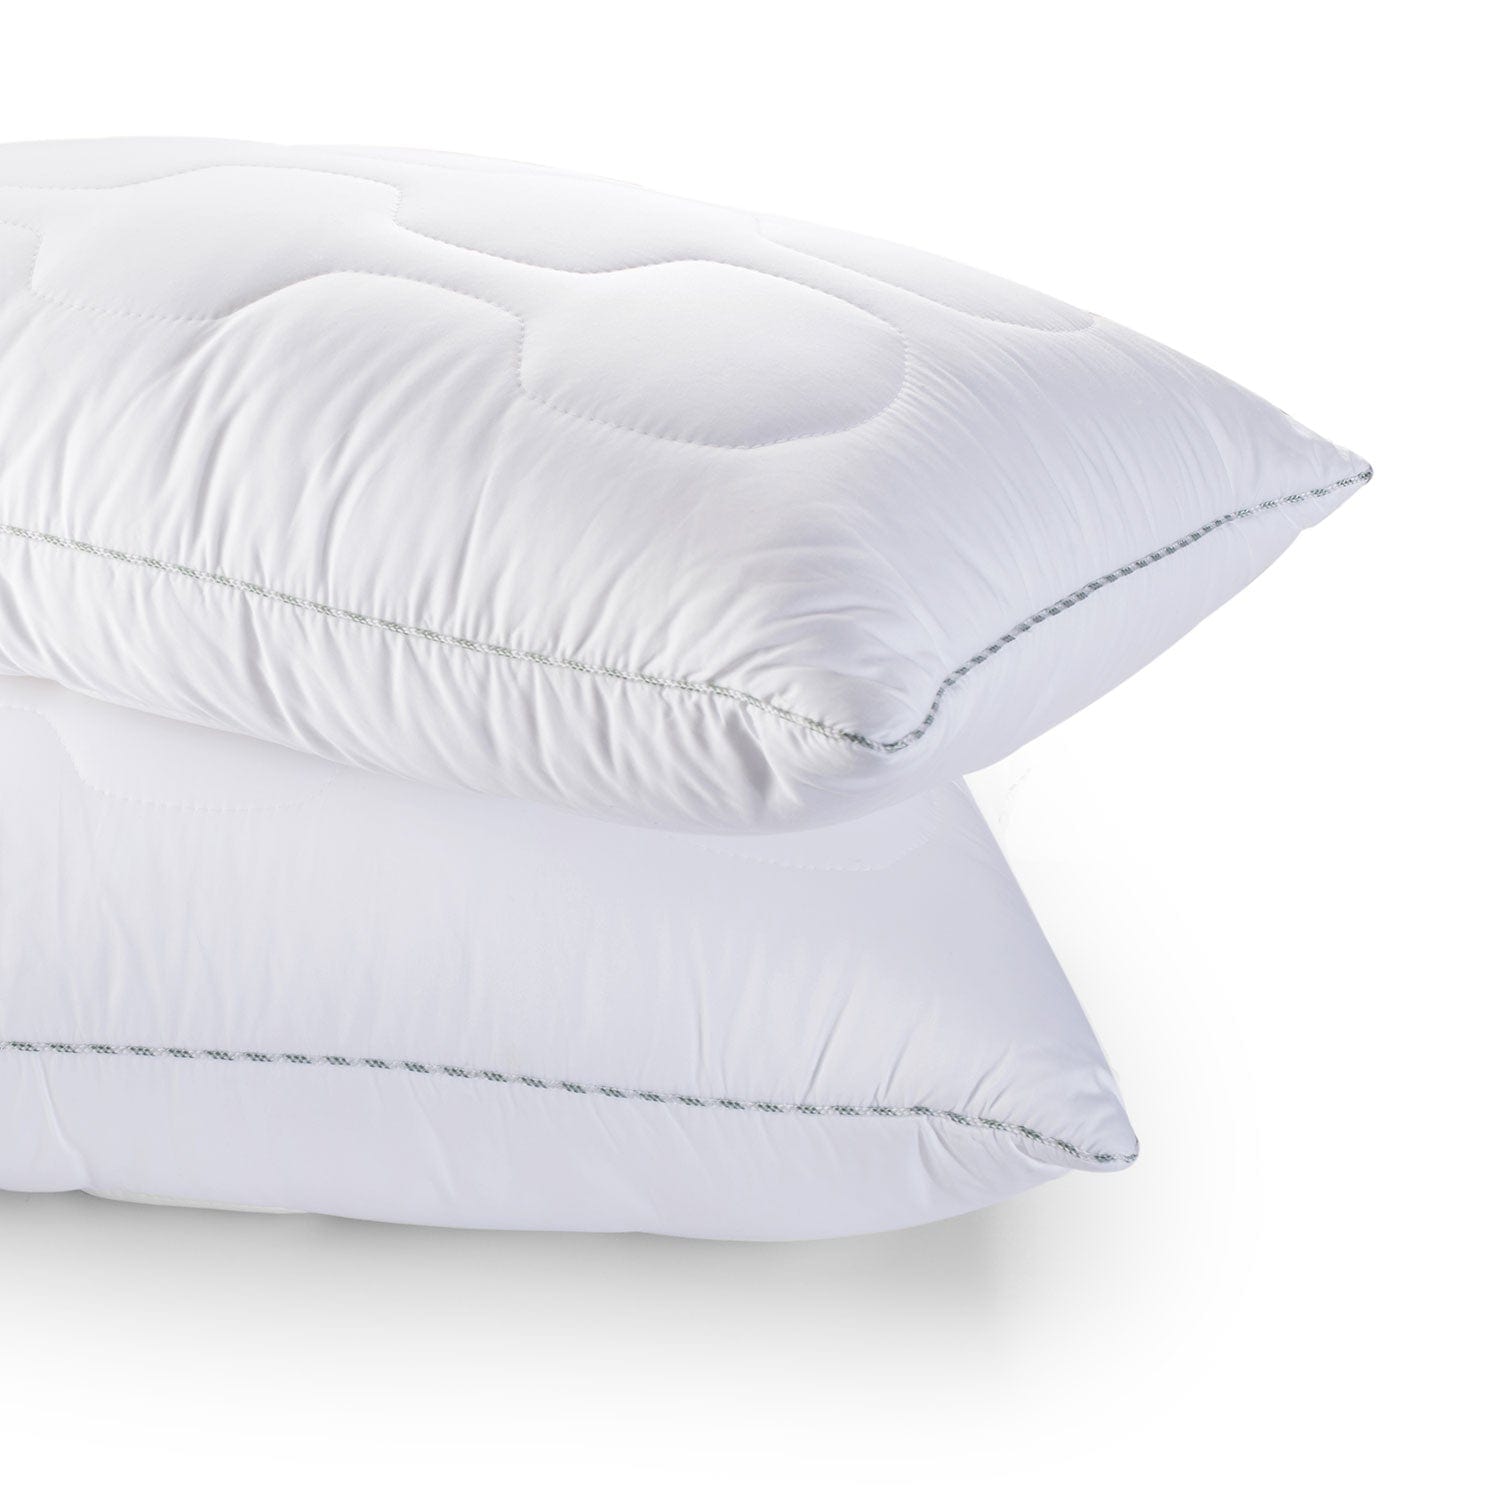 Tencel™ Pillow extract from wood pulp